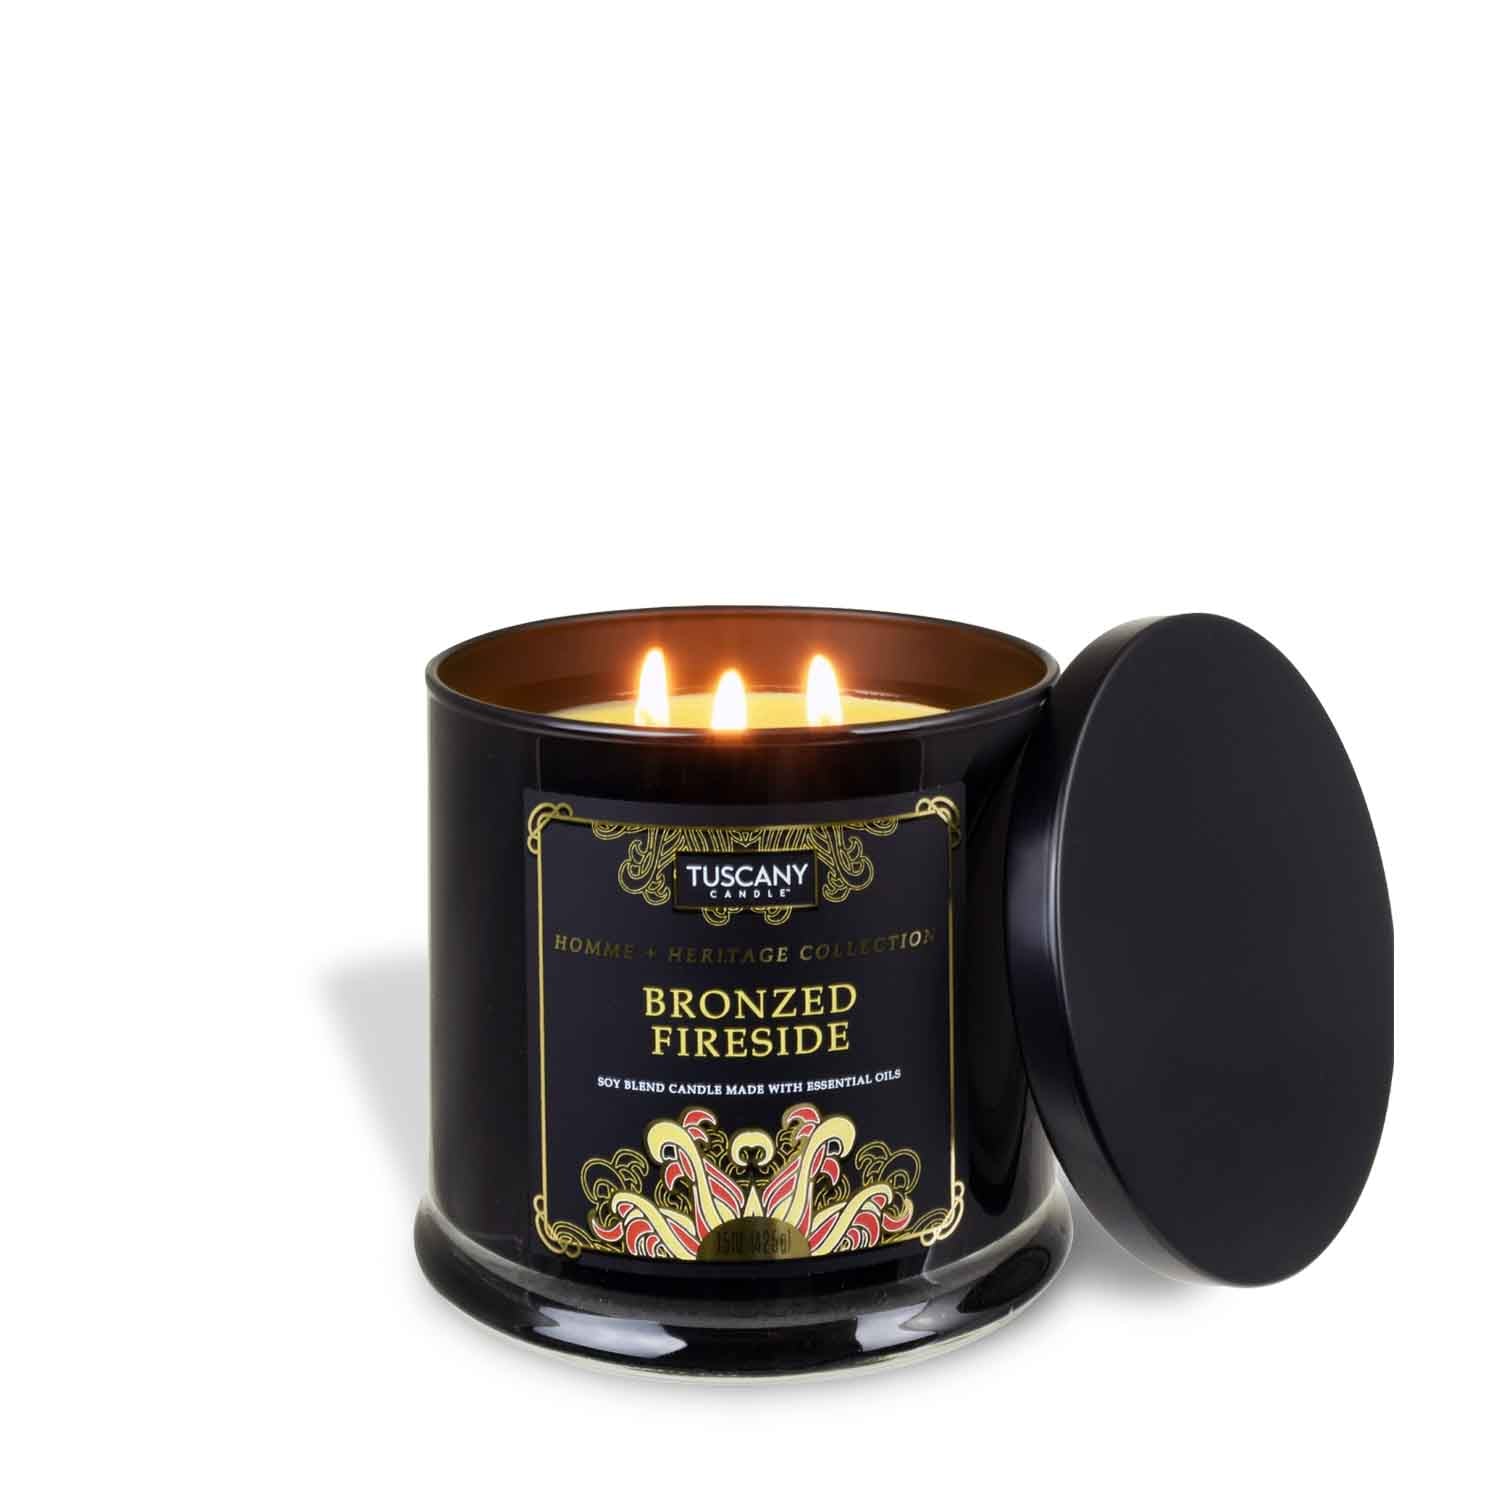 A Bronzed Fireside Scented Jar Candle (15 oz) from the Homme + Heritage Collection by Tuscany Candle in a black tin on a white background.